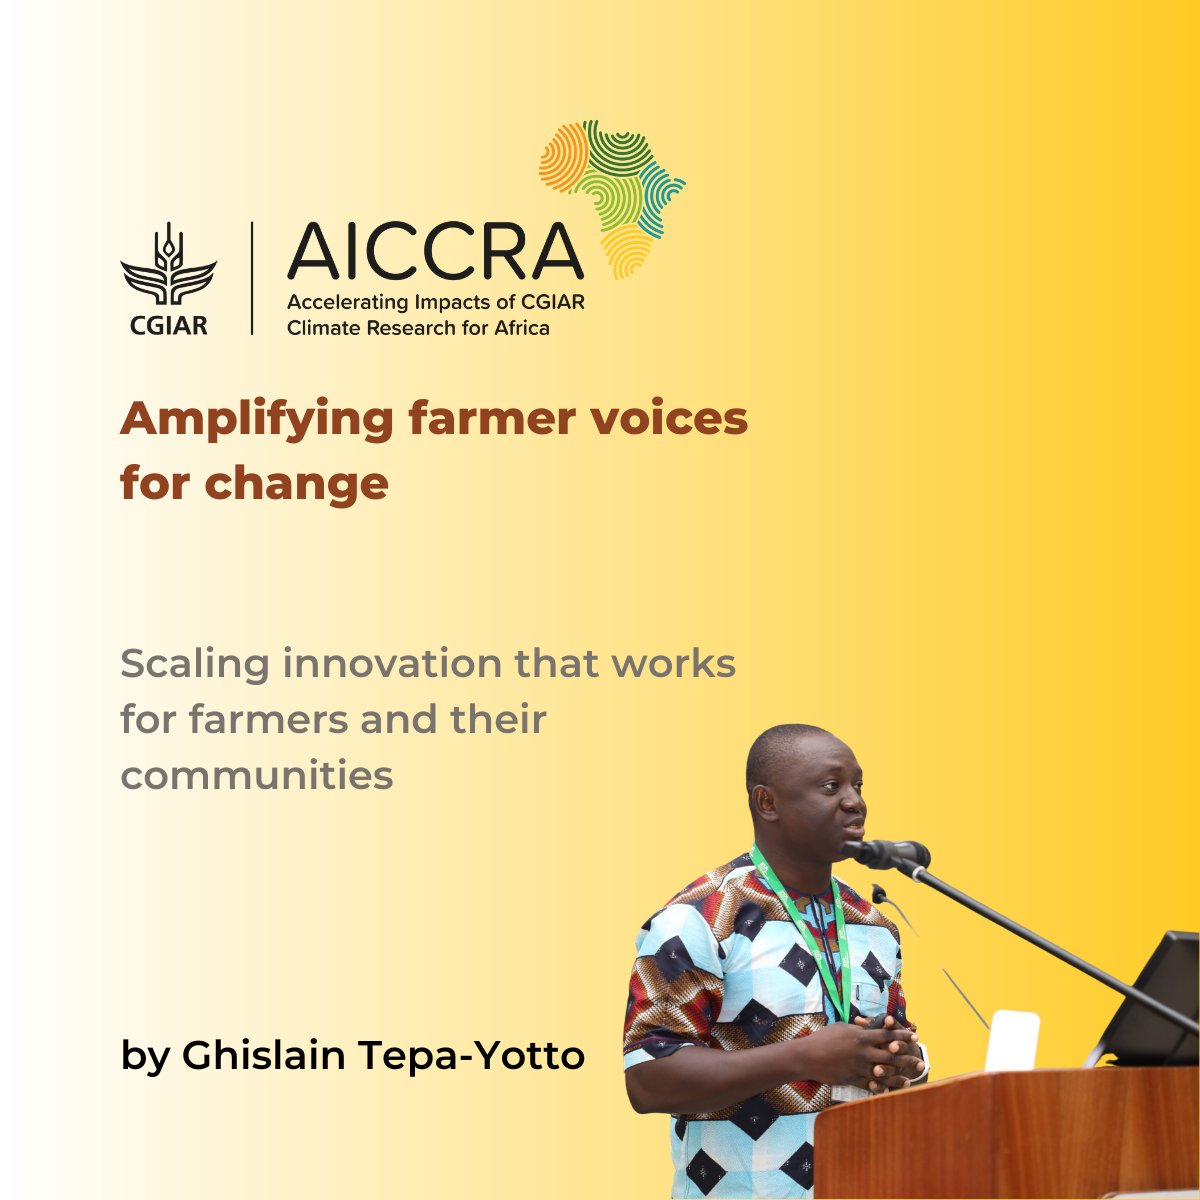 By listening to & learning from stakeholders across agriculture’s value chains, we will continue to connect @CGIAR science & research with local knowledge to find innovations and solutions that work for African #farmers.

🔗 Read: bit.ly/AICCRA2022 

#ClimateSmartAfrica